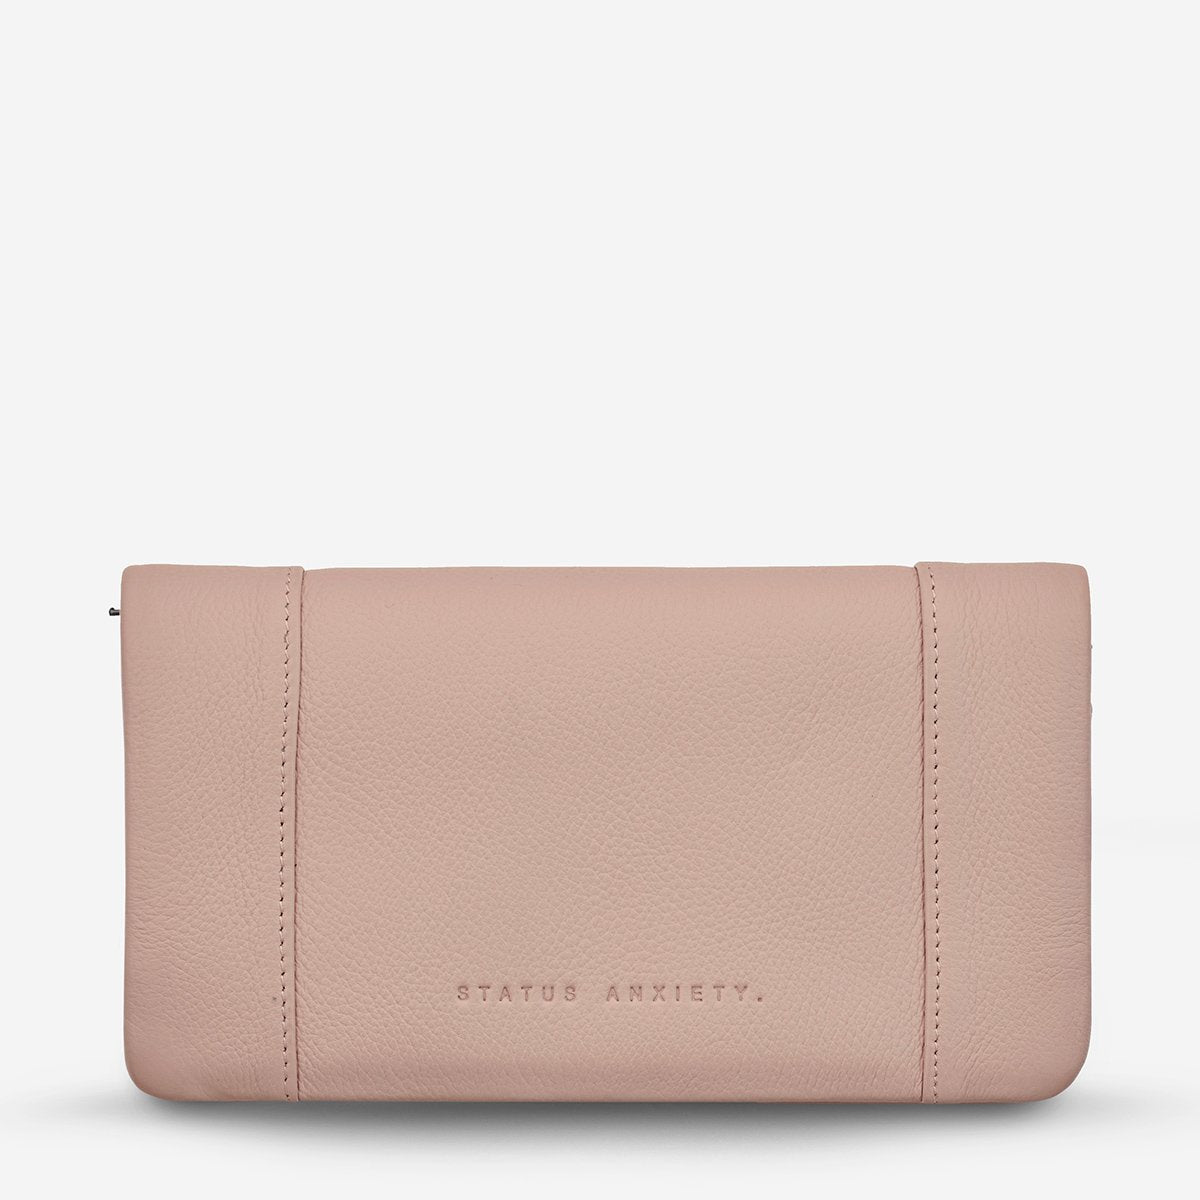 Status Anxiety | Some Type of Love  Wallet - Found My Way Invercargill